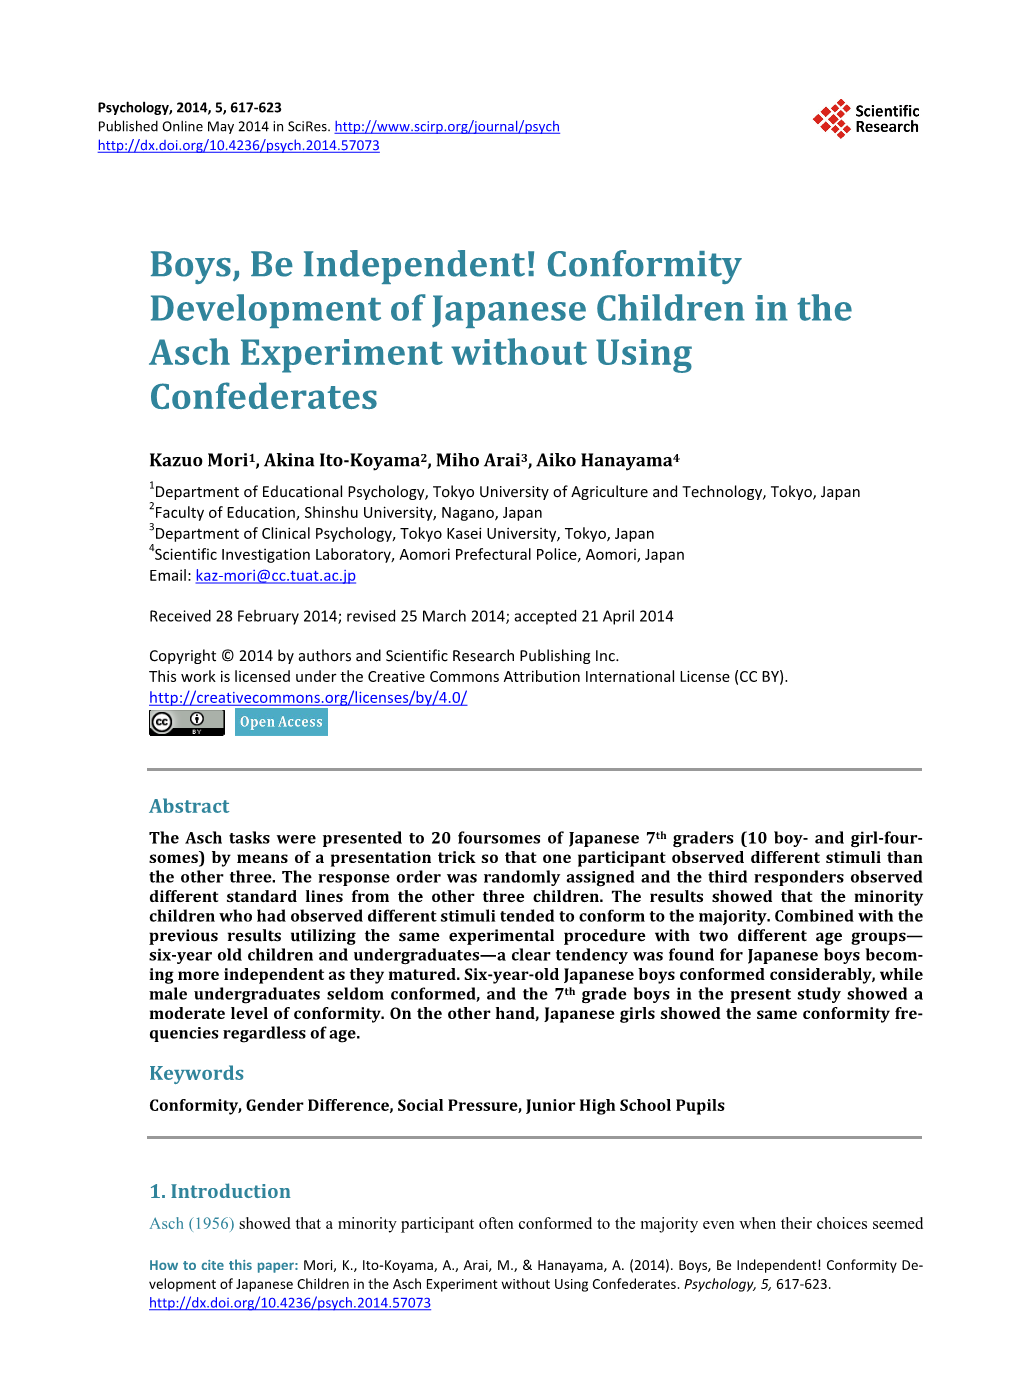 Boys, Be Independent! Conformity Development of Japanese Children in the Asch Experiment Without Using Confederates